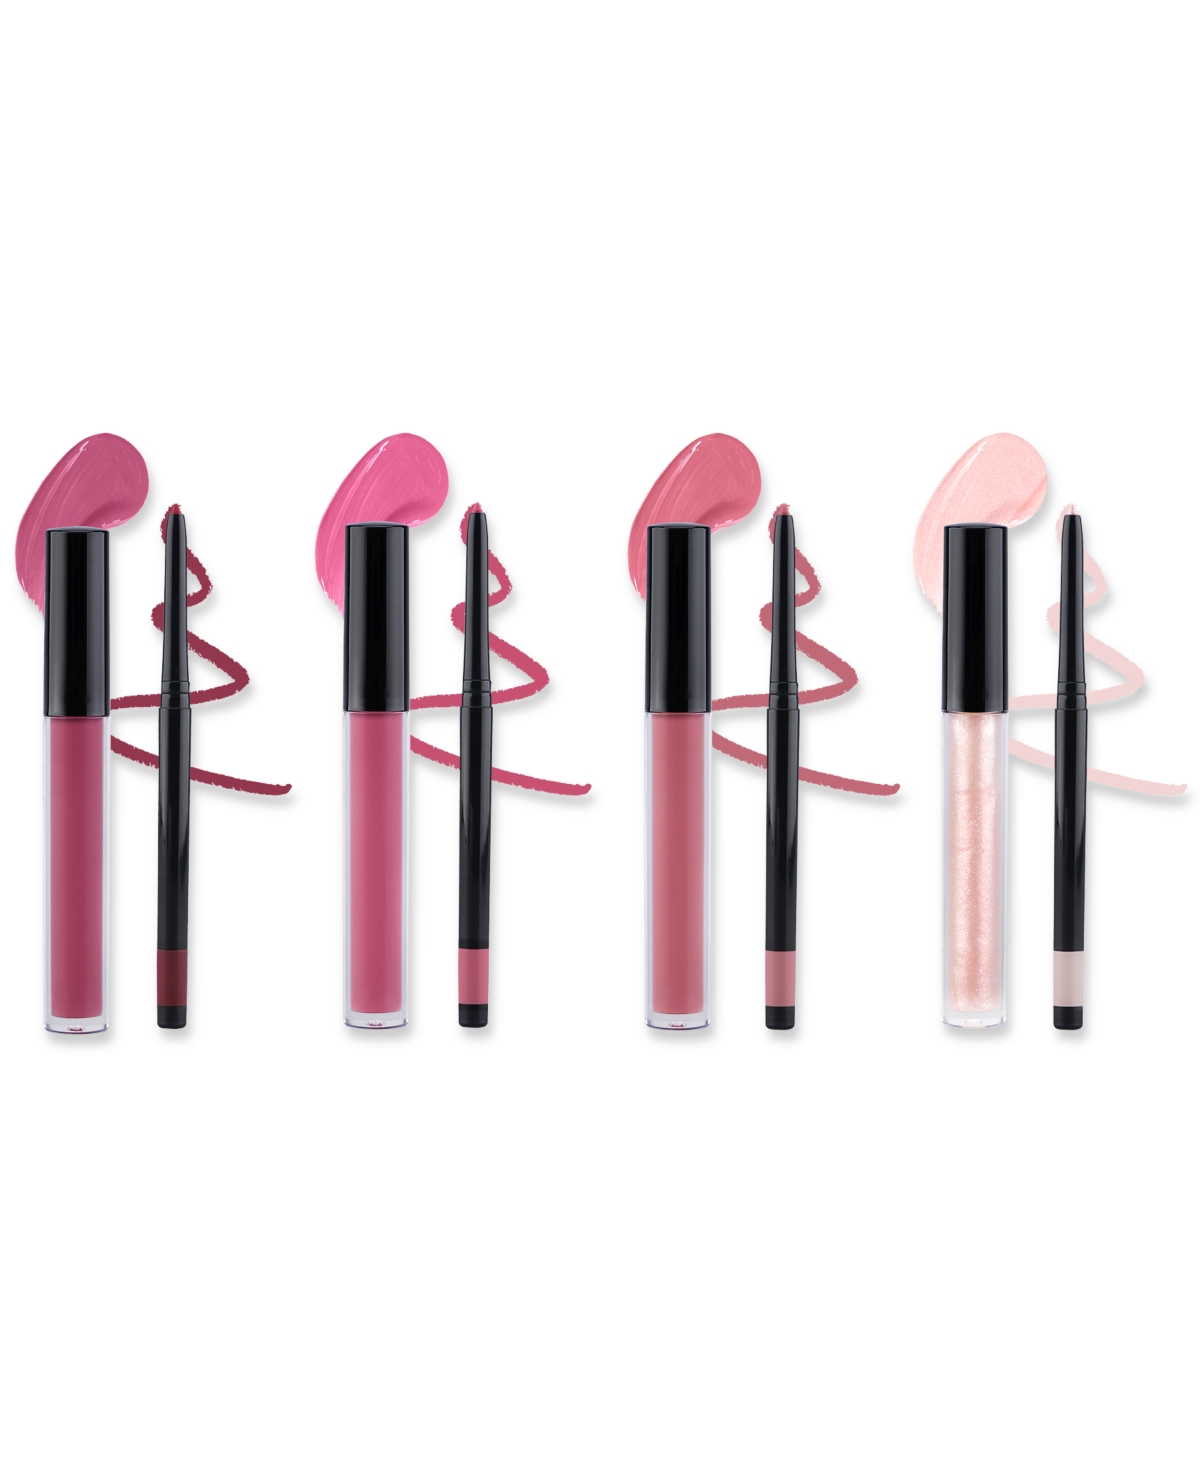 Shop Created For Macy's 8-pc. Star Struck Lip Set,  In No Color